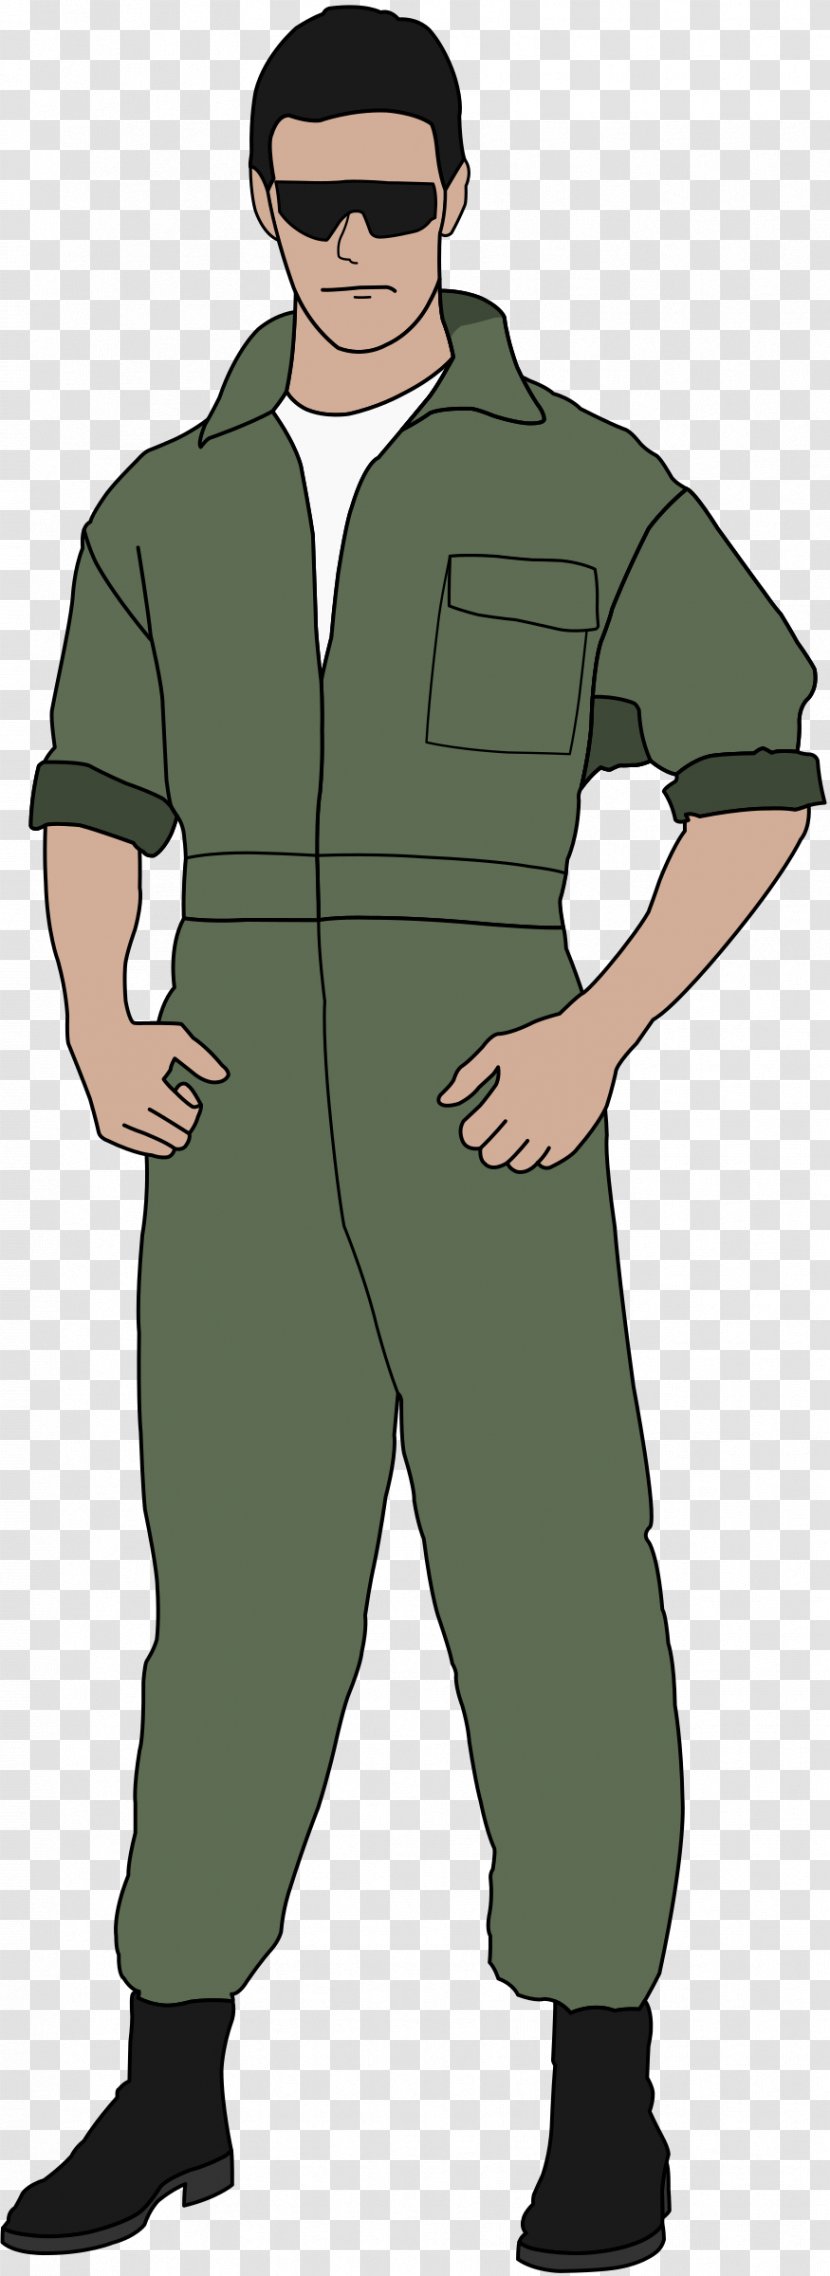 Airplane 0506147919 Jumpsuit Costume Fighter Pilot - Joint - Wings Cliparts Transparent PNG